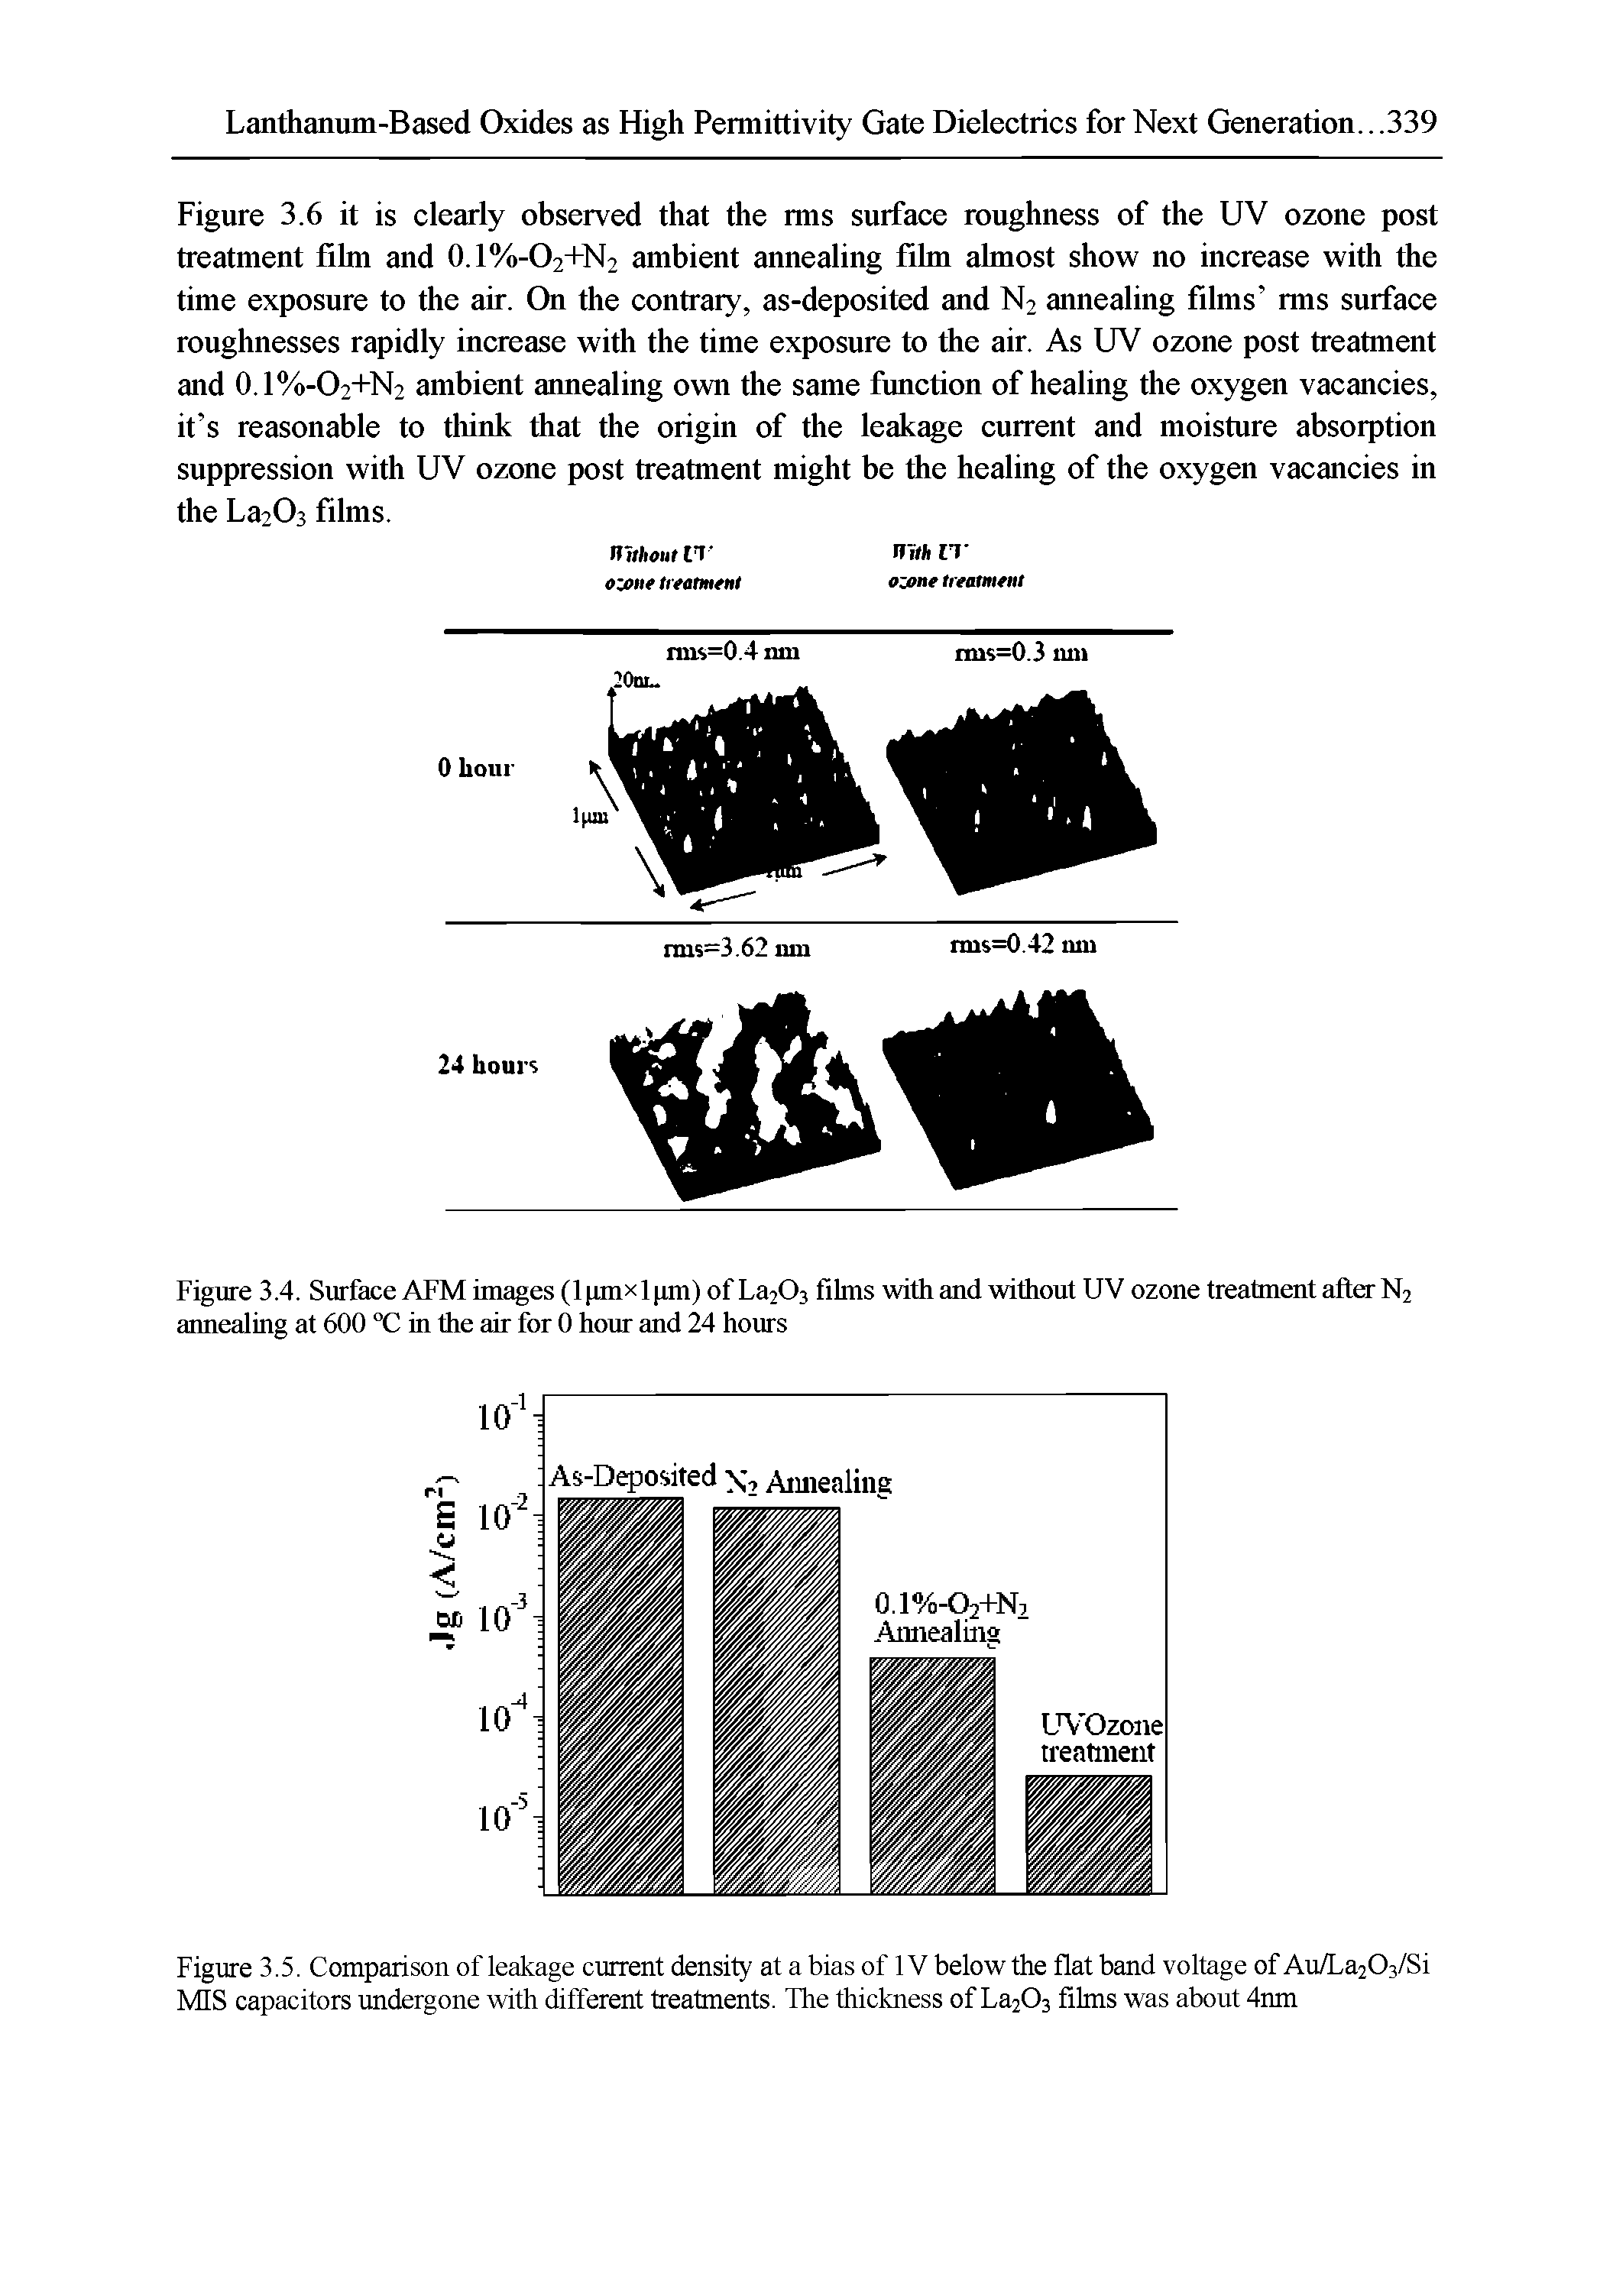 Figure 3.5. Comparison of leakage current density at a bias of IV below the flat band voltage of Au/La203/Si MIS capacitors undergone with different treatments. The thickness of La203 films was about 4nm...